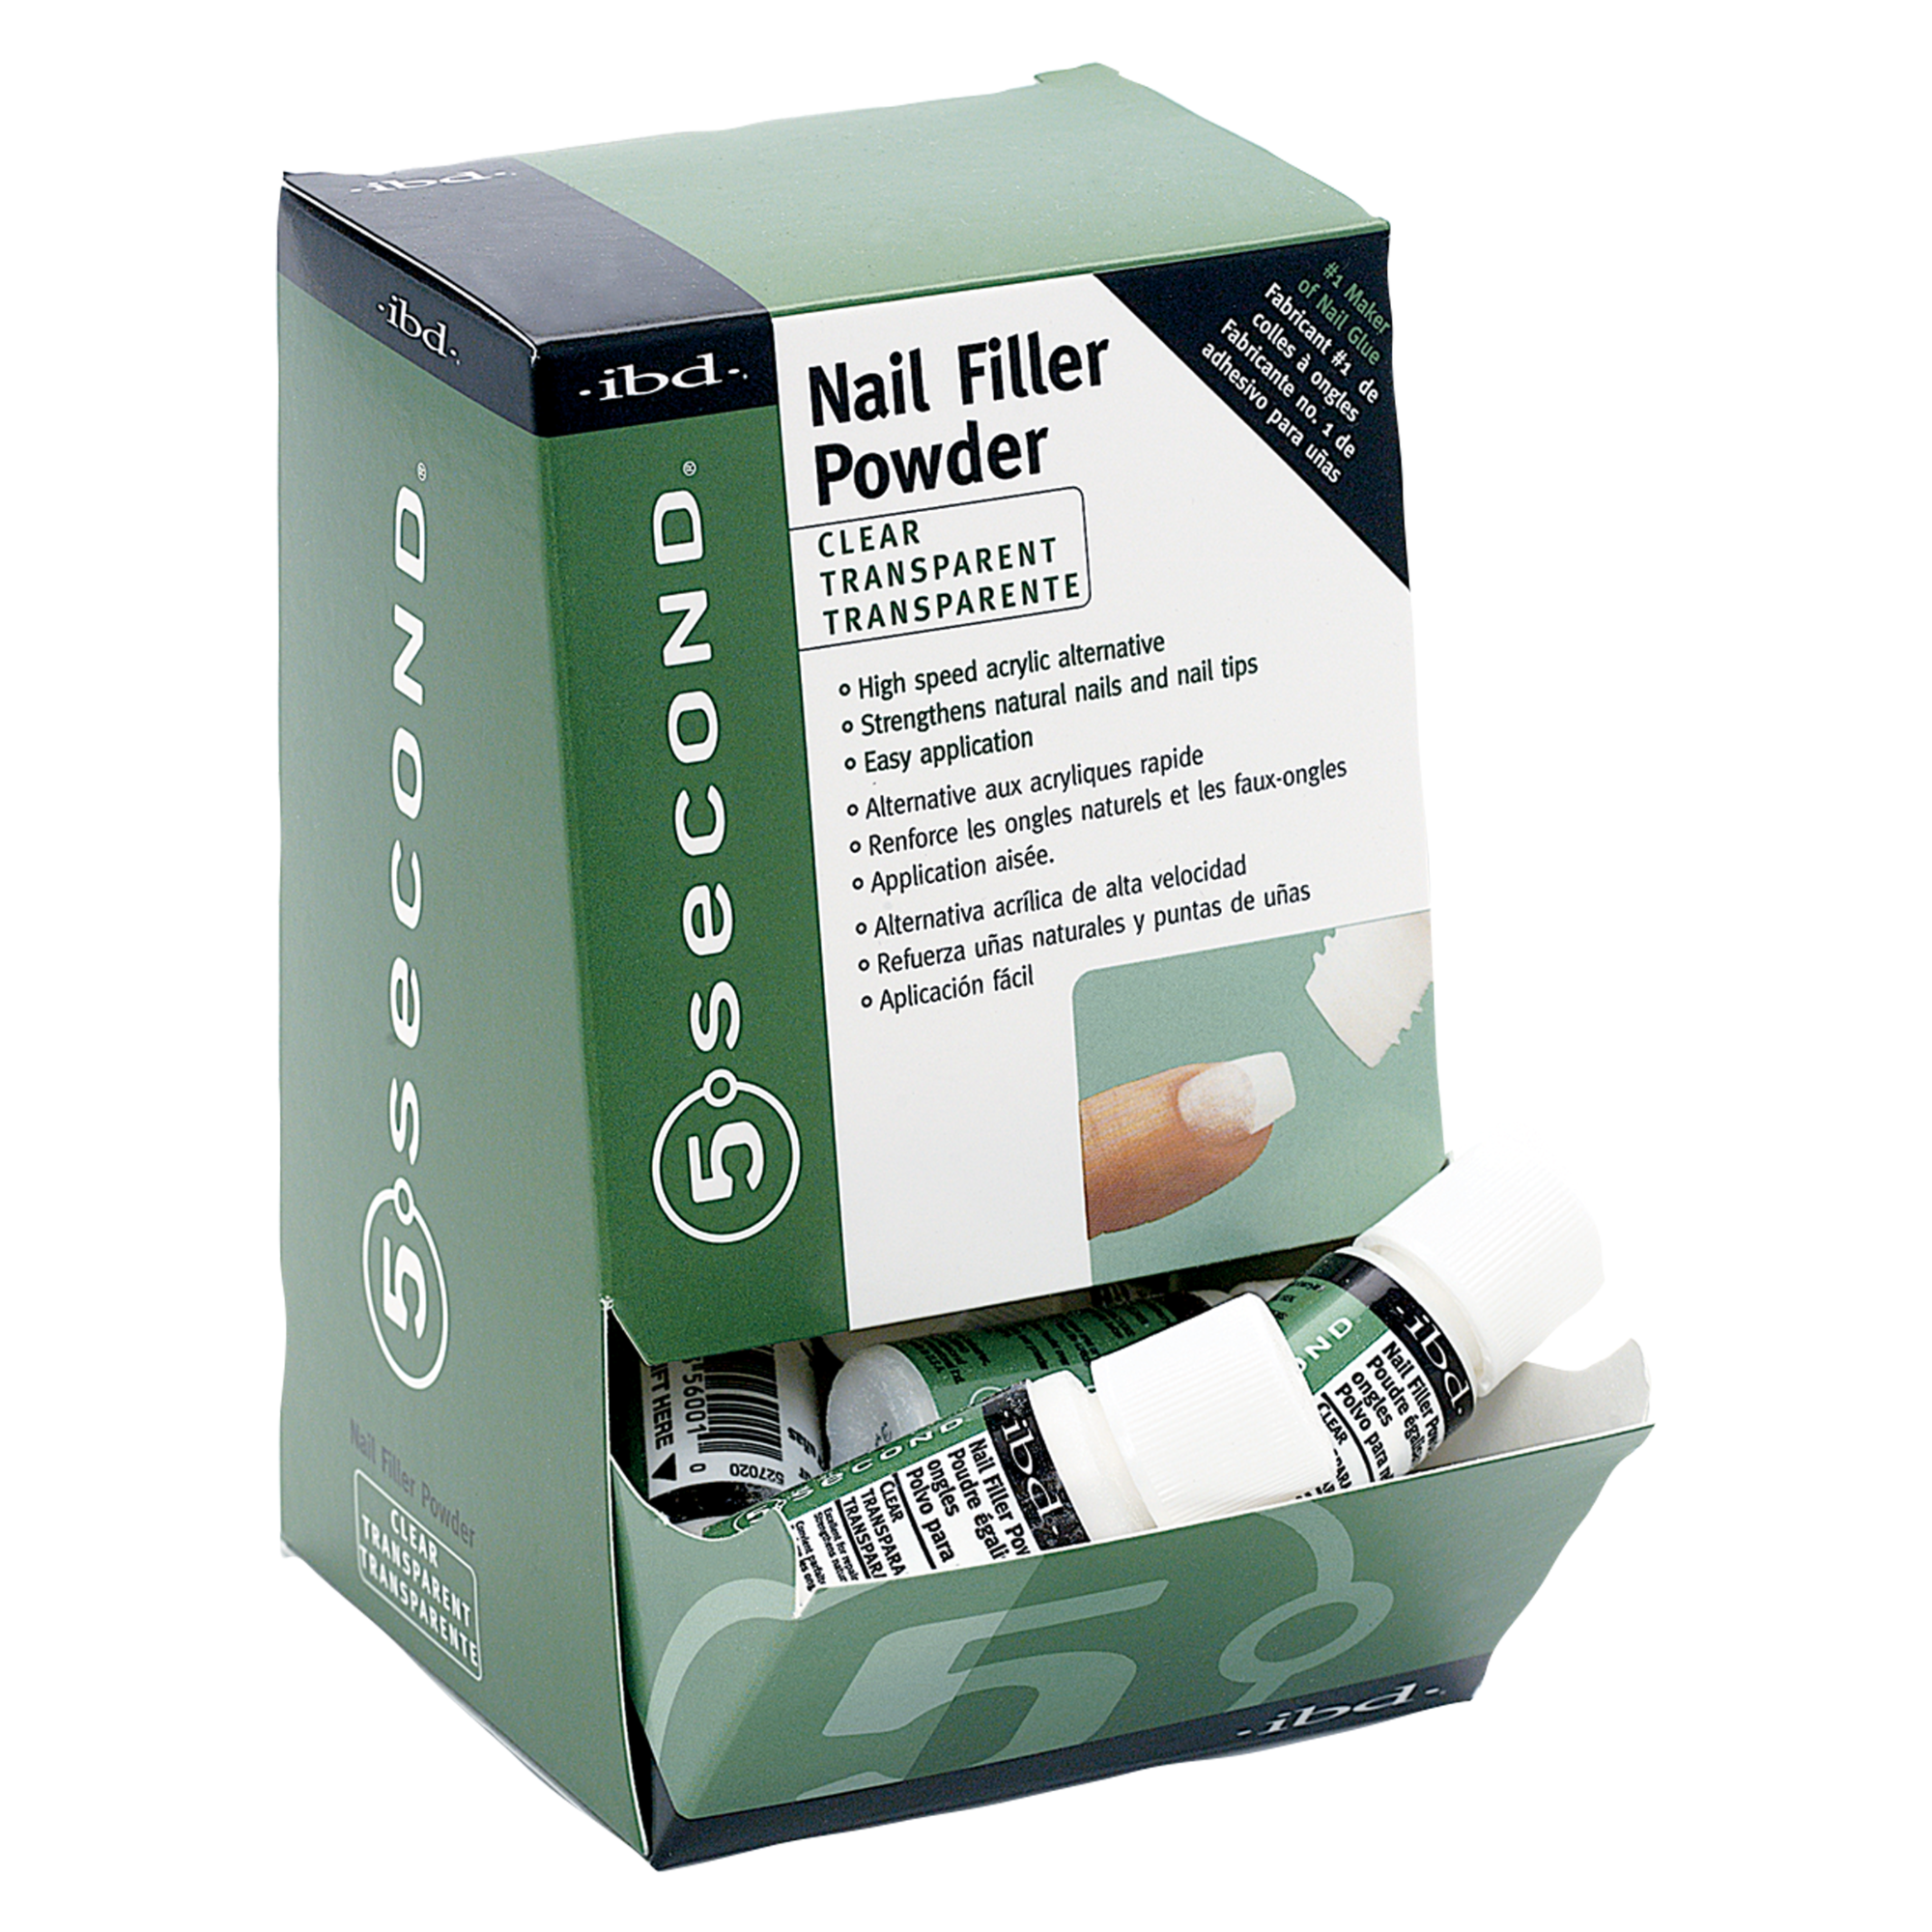 Nail Filler Powder, 5 Second Clear - Display of 12